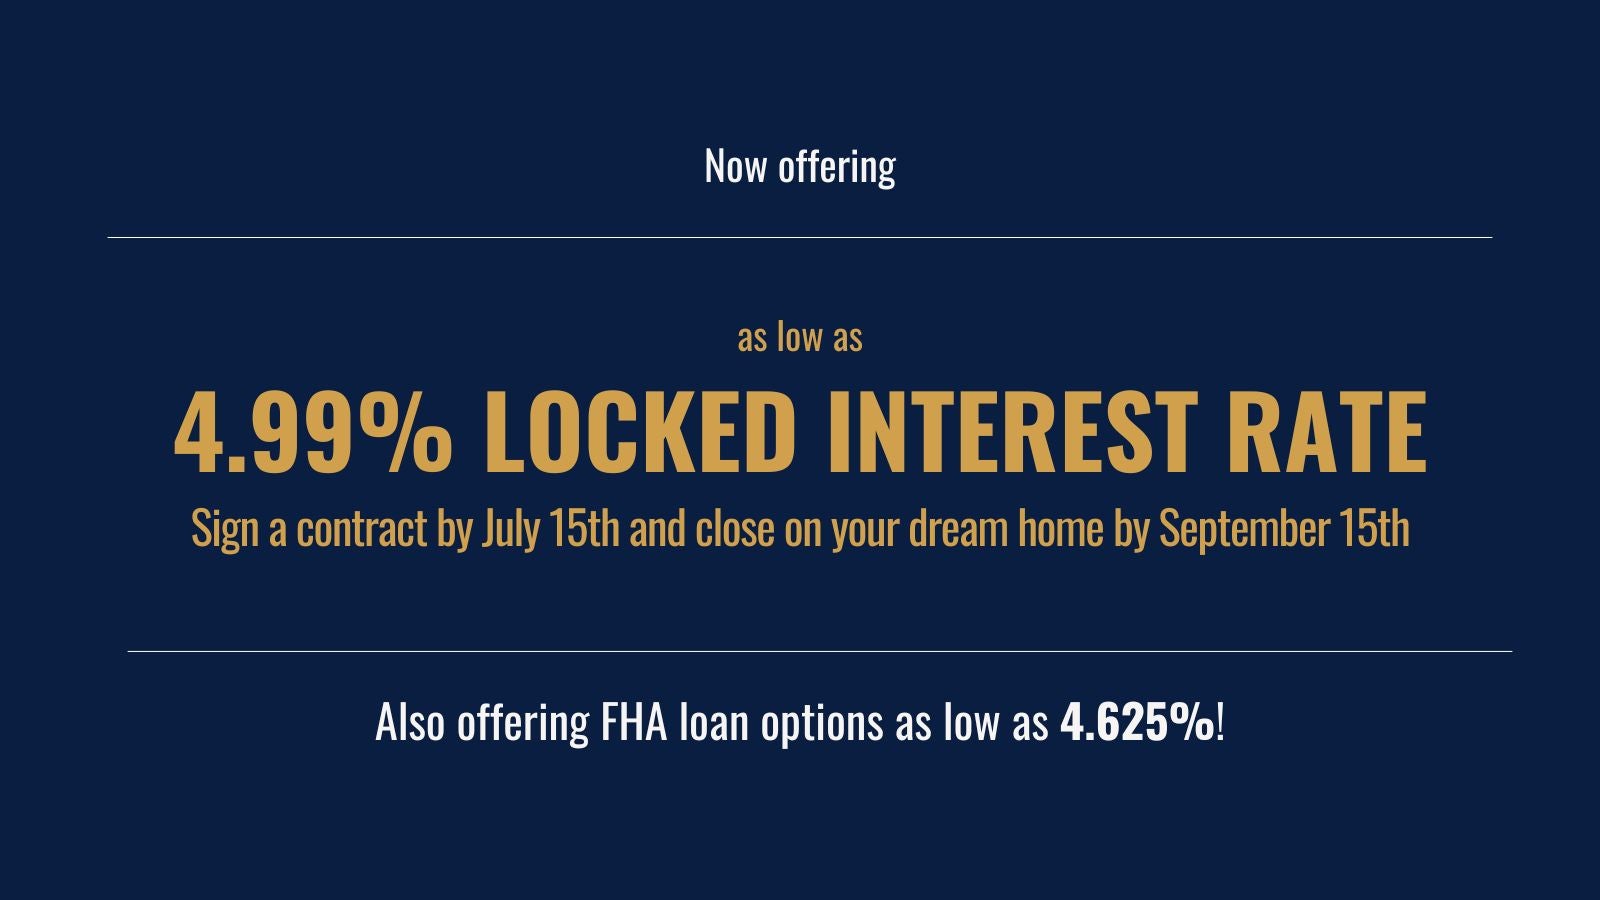 This Summer, Lock in a Rate as Low as 4.625%!